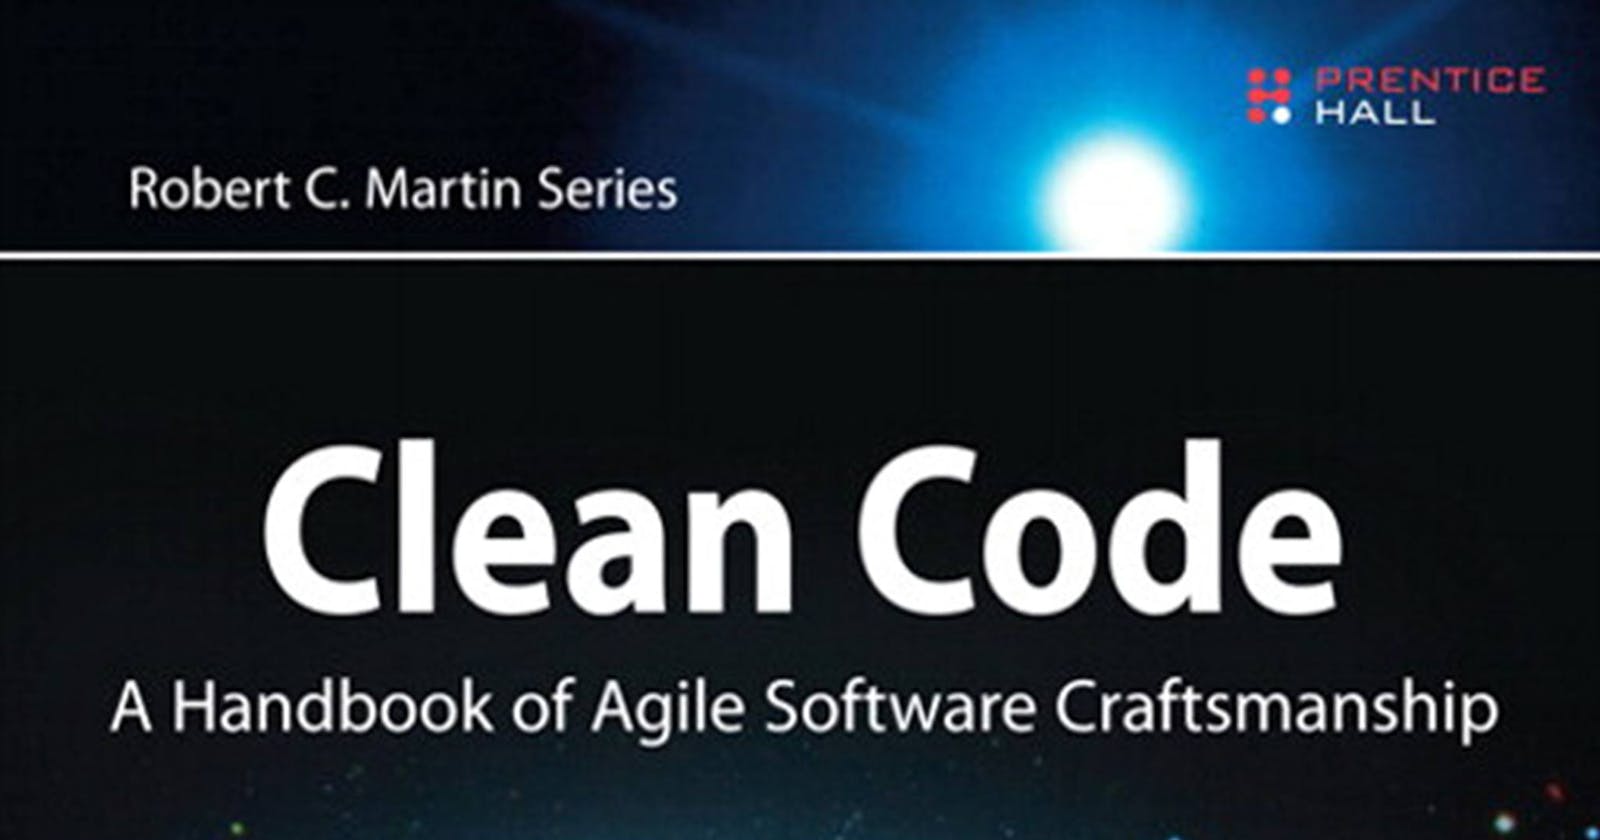 Clean code best practices: Tips and examples for writing maintainable software